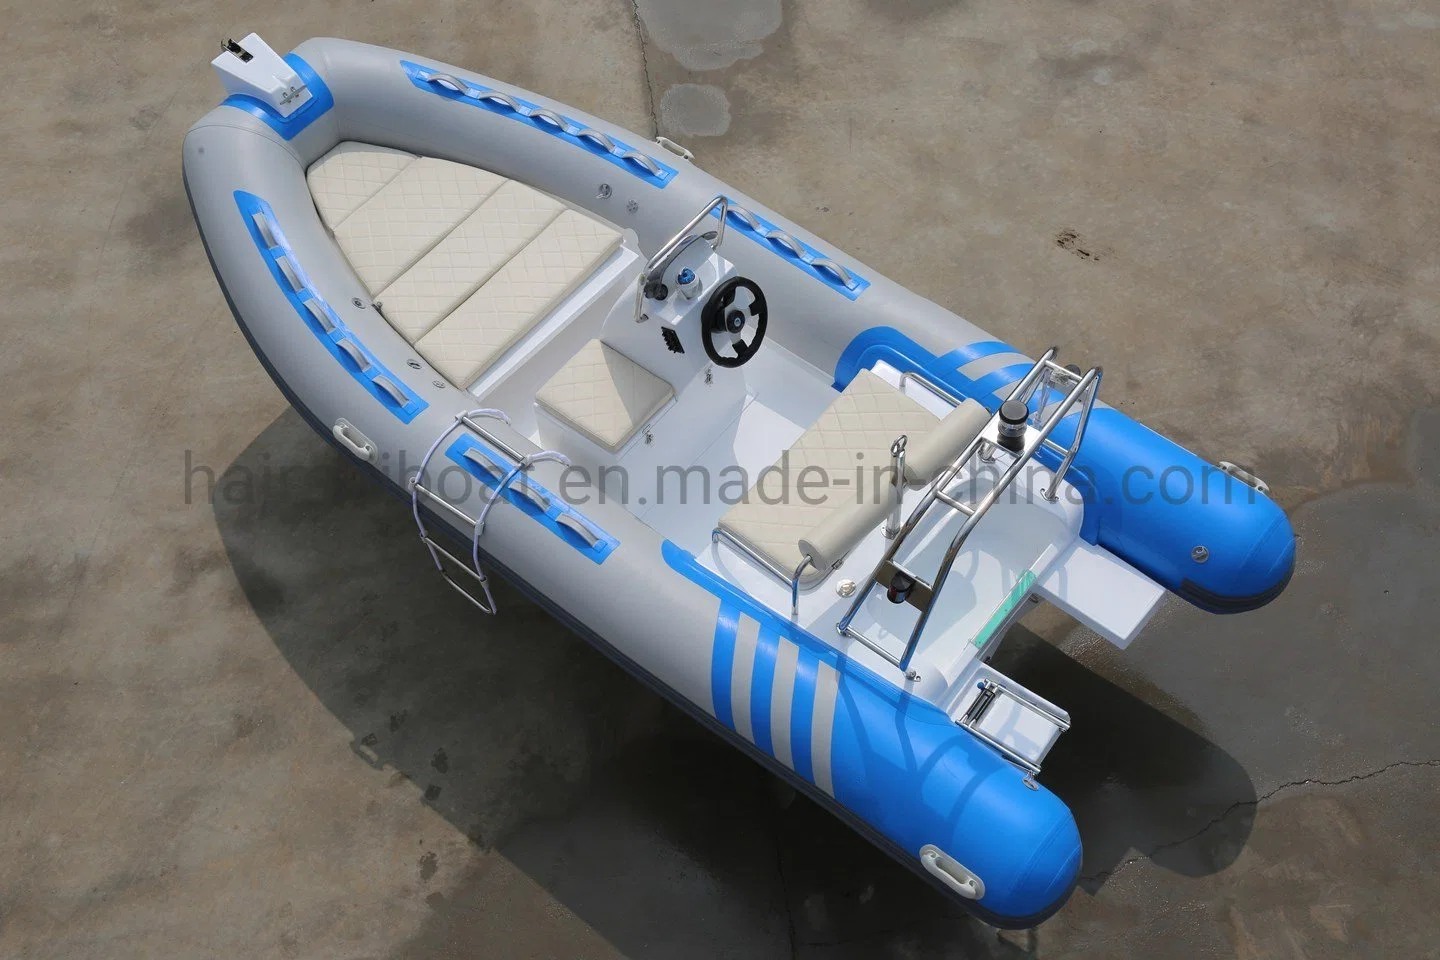 Hot Selling Item 15.7feet 4.8m Multi Colors Fiberglass Rigid Hull Orca Hypalon PVC Inflatable Boat Outboard Motor Boat Marine Rescue Boat Angling Boat for Sale